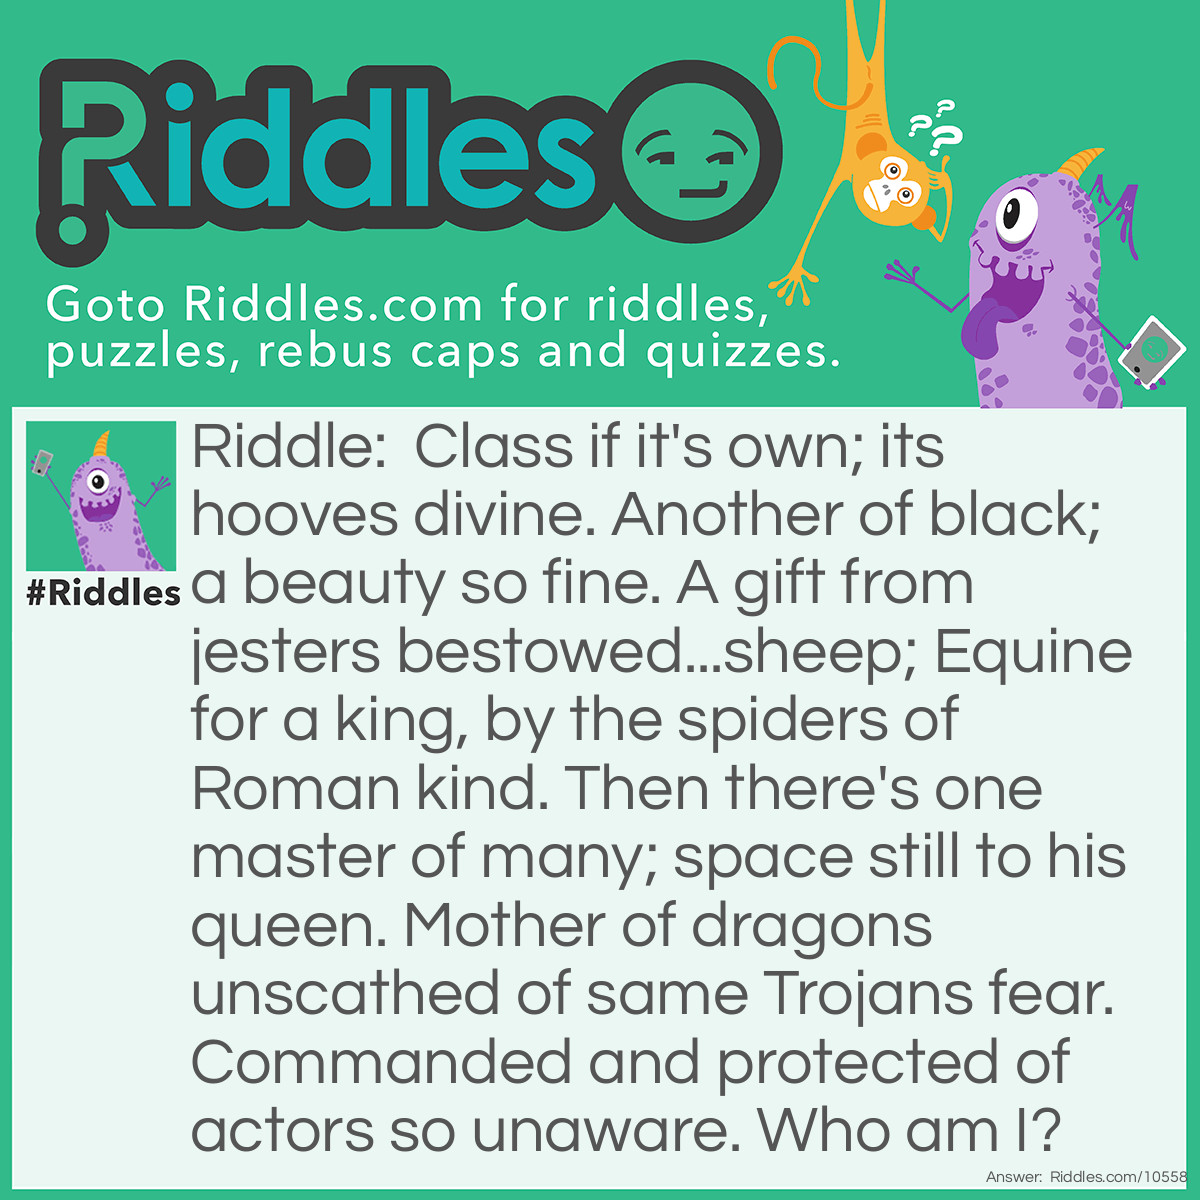 Riddle: Class if it's own; its hooves divine. Another of black; a beauty so fine. A gift from jesters bestowed...sheep; Equine for a king, by the spiders of Roman kind. Then there's one master of many; space still to his queen. Mother of dragons unscathed of same Trojans fear. Commanded and protected of actors so unaware. Who am I? Answer: UNANSWERED